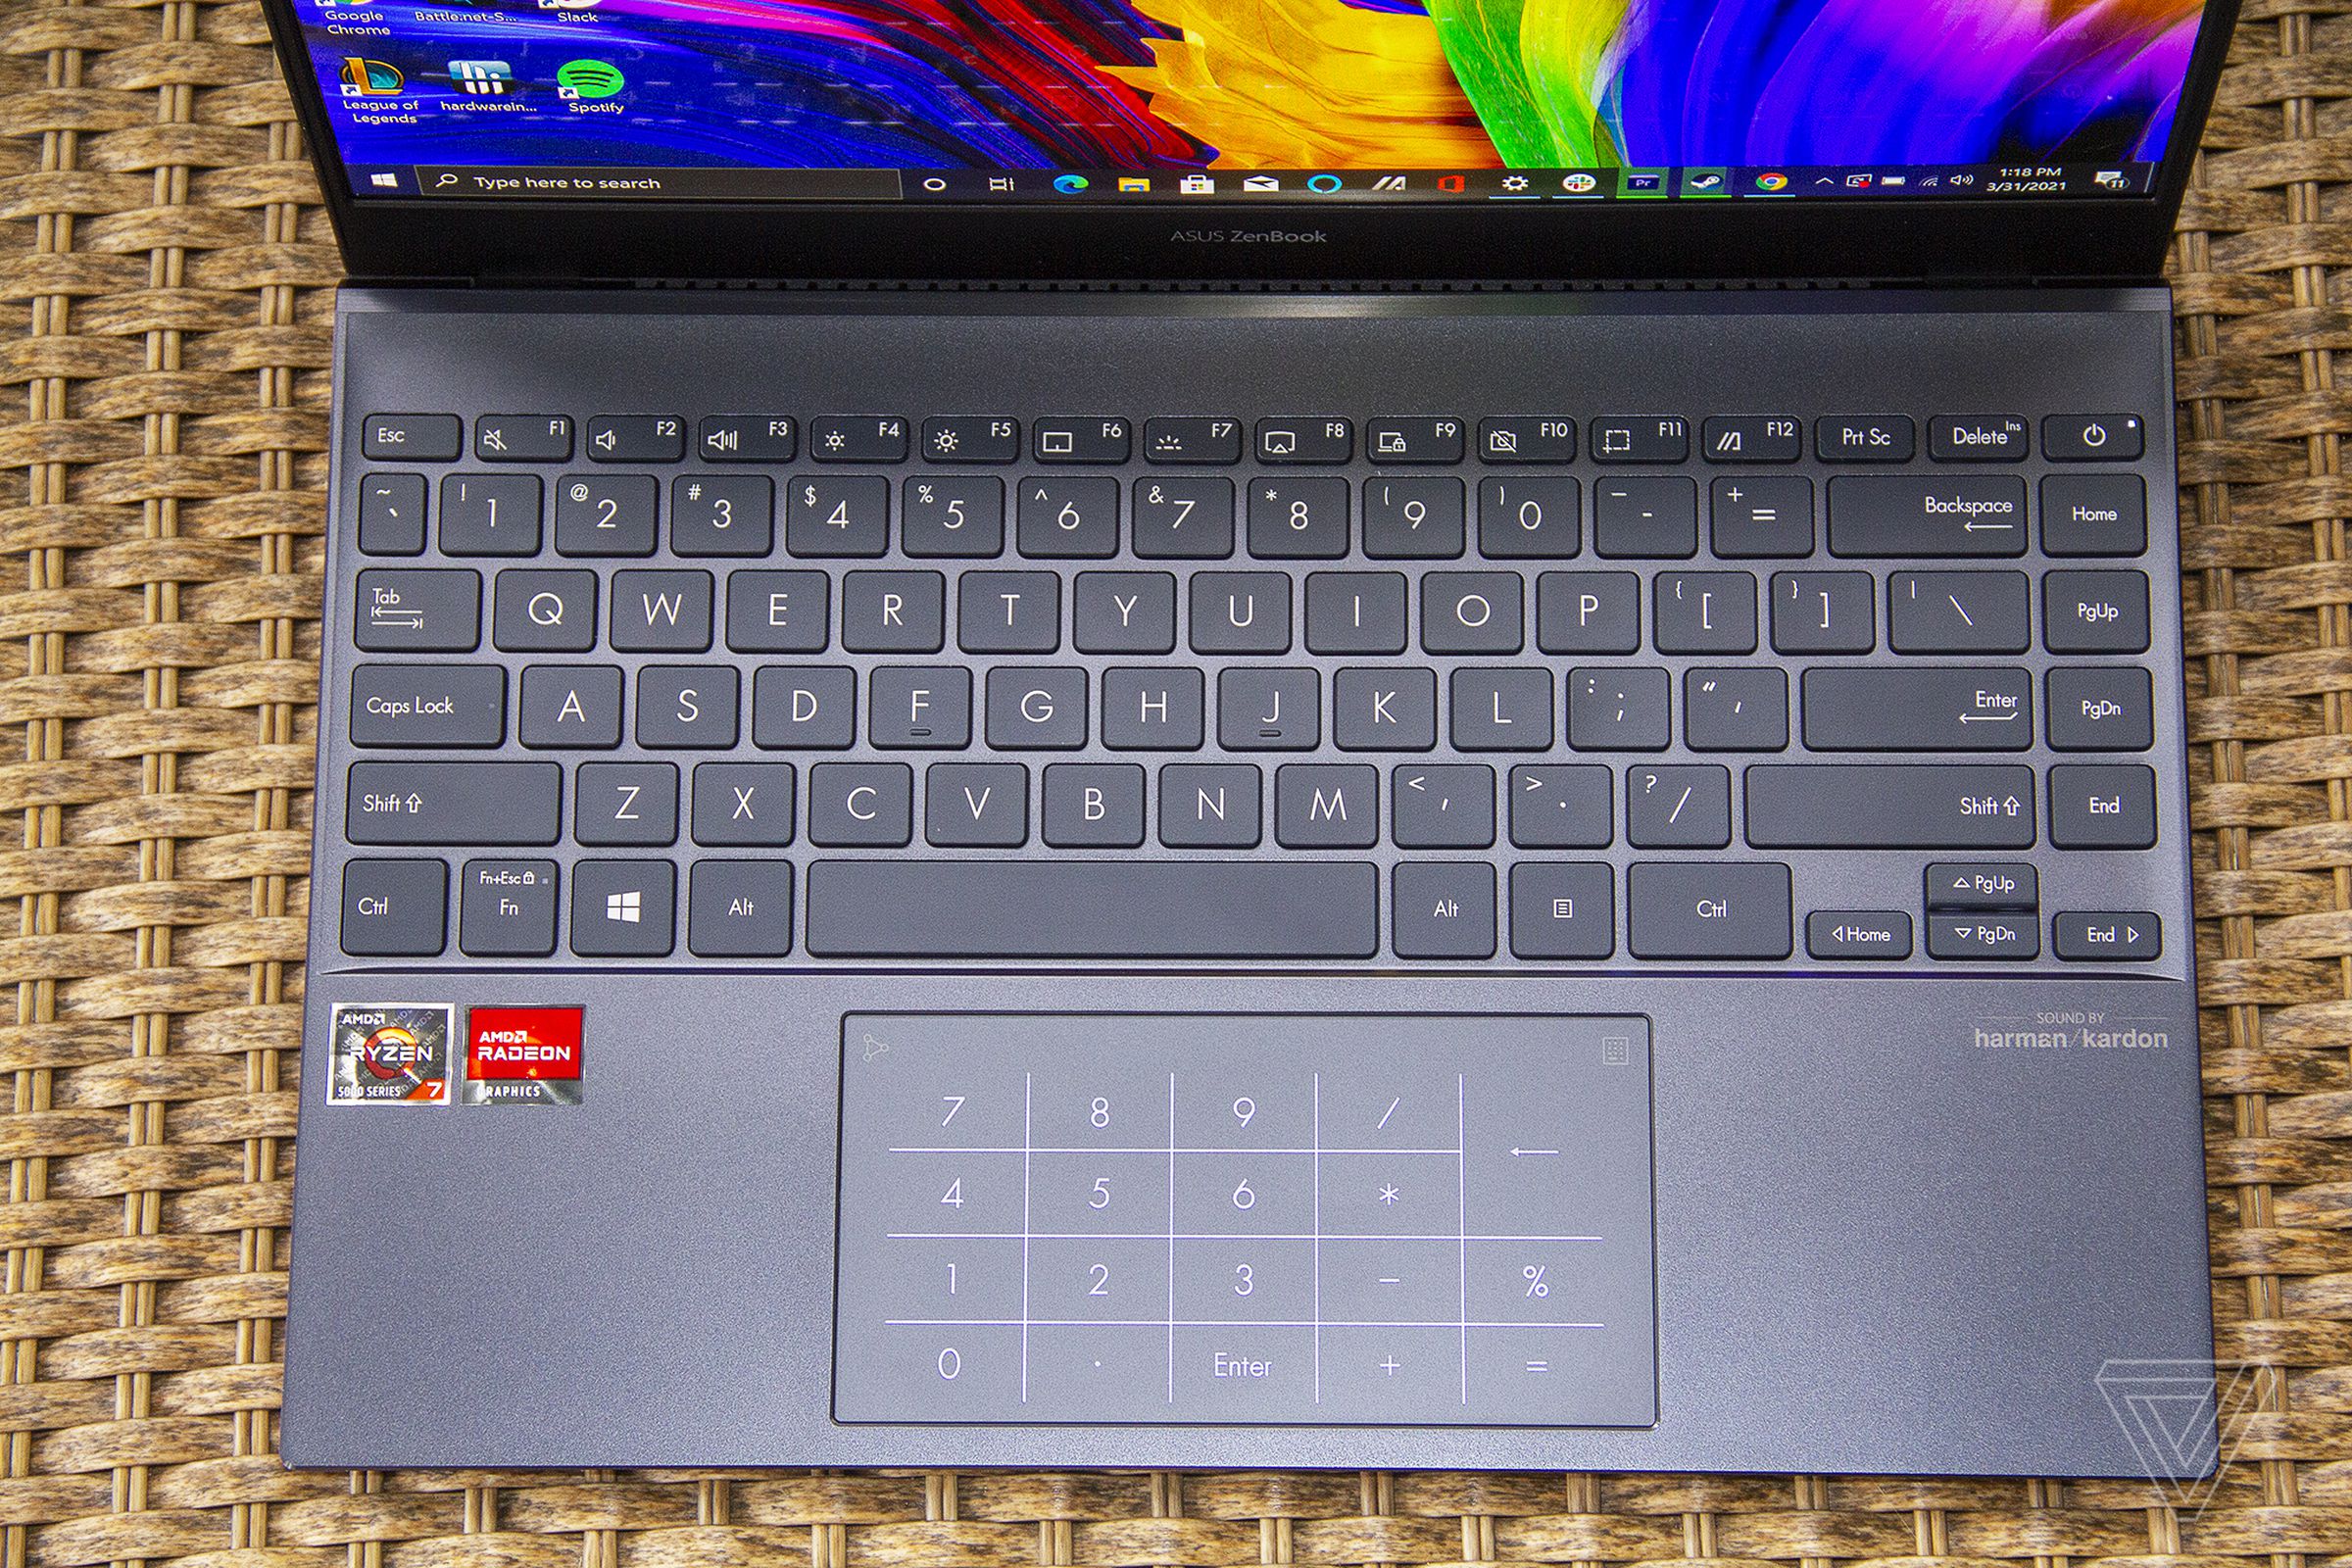 The Asus Zenbook 13 OLED keyboard seen from above. The screen displays an LED numpad.